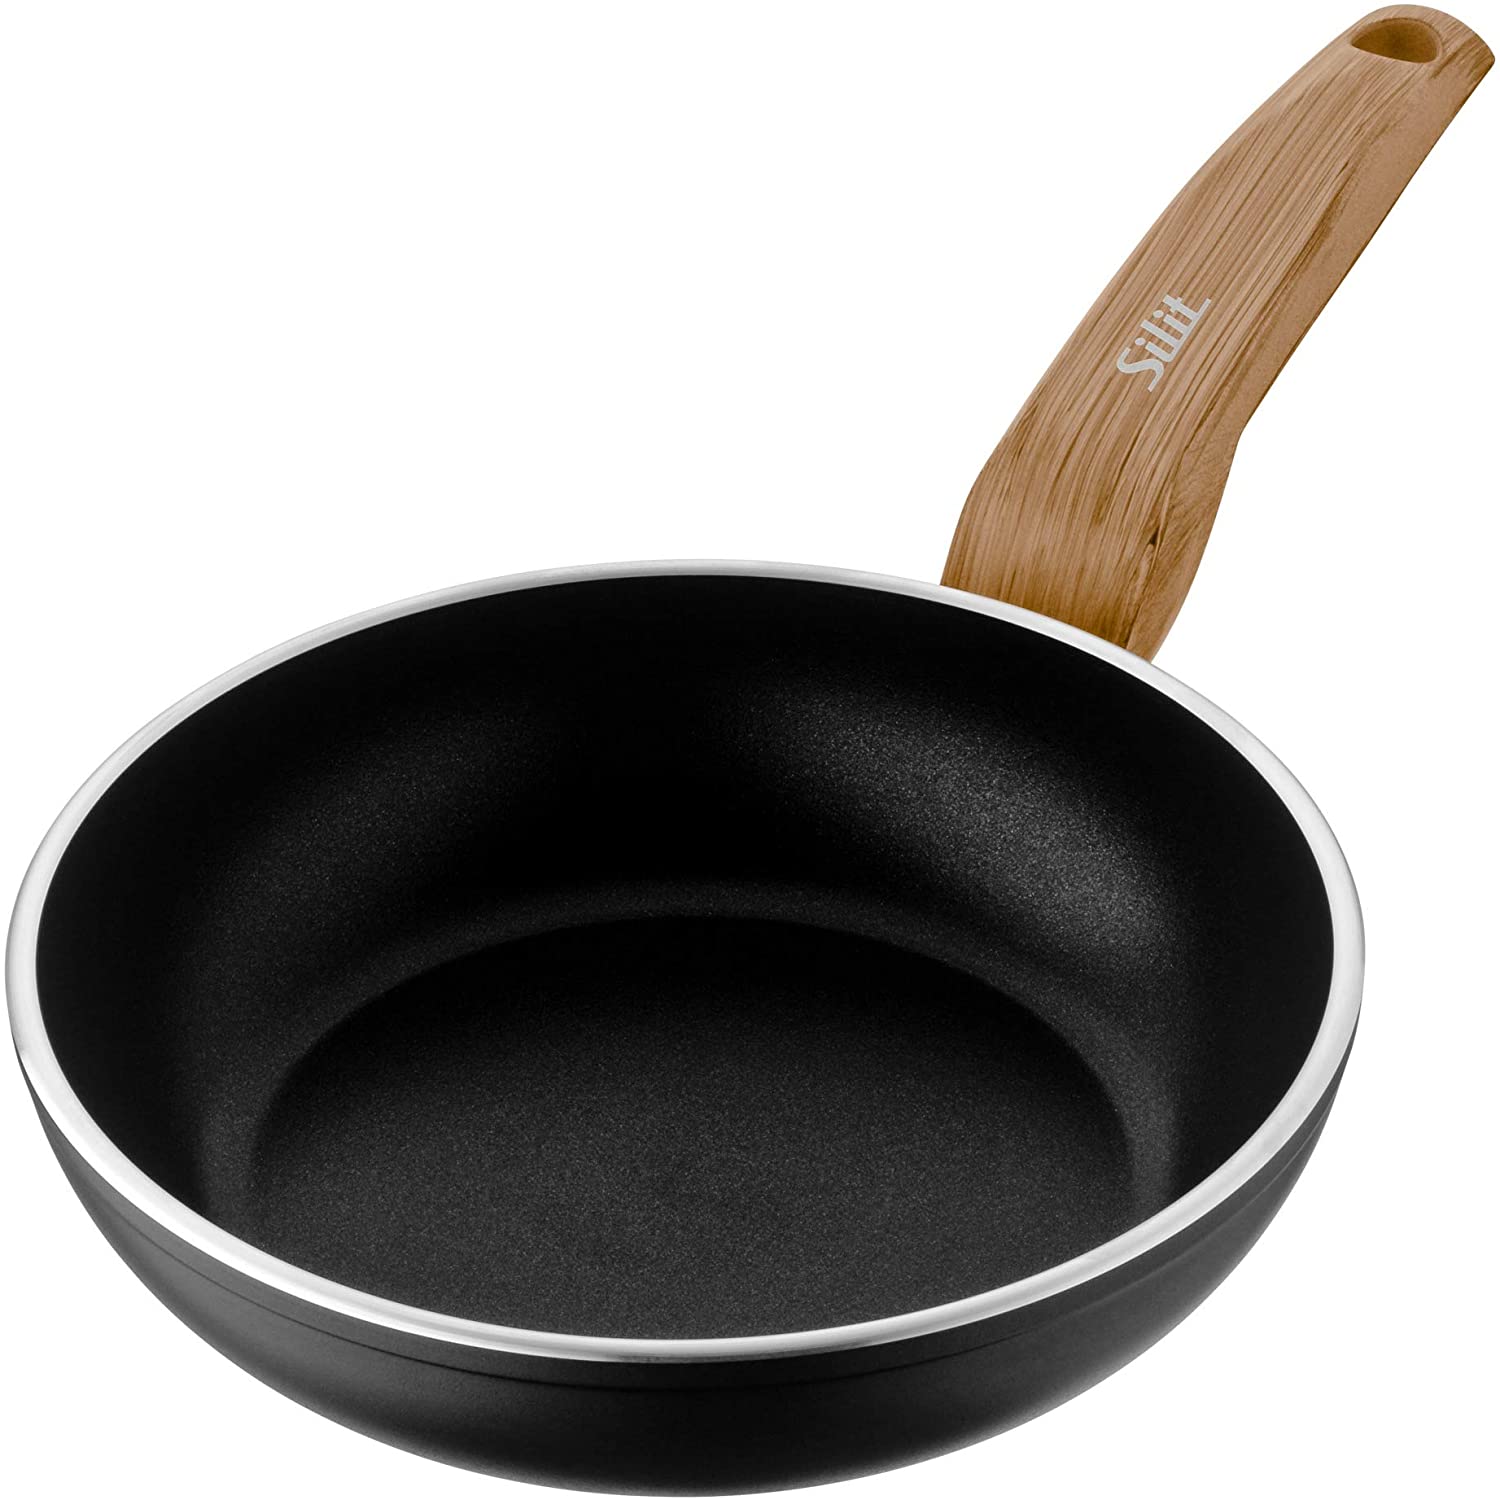 Silit Faggo Induction Frying Pan 20 cm Aluminium Coated with Plastic Handle for Gentle Frying